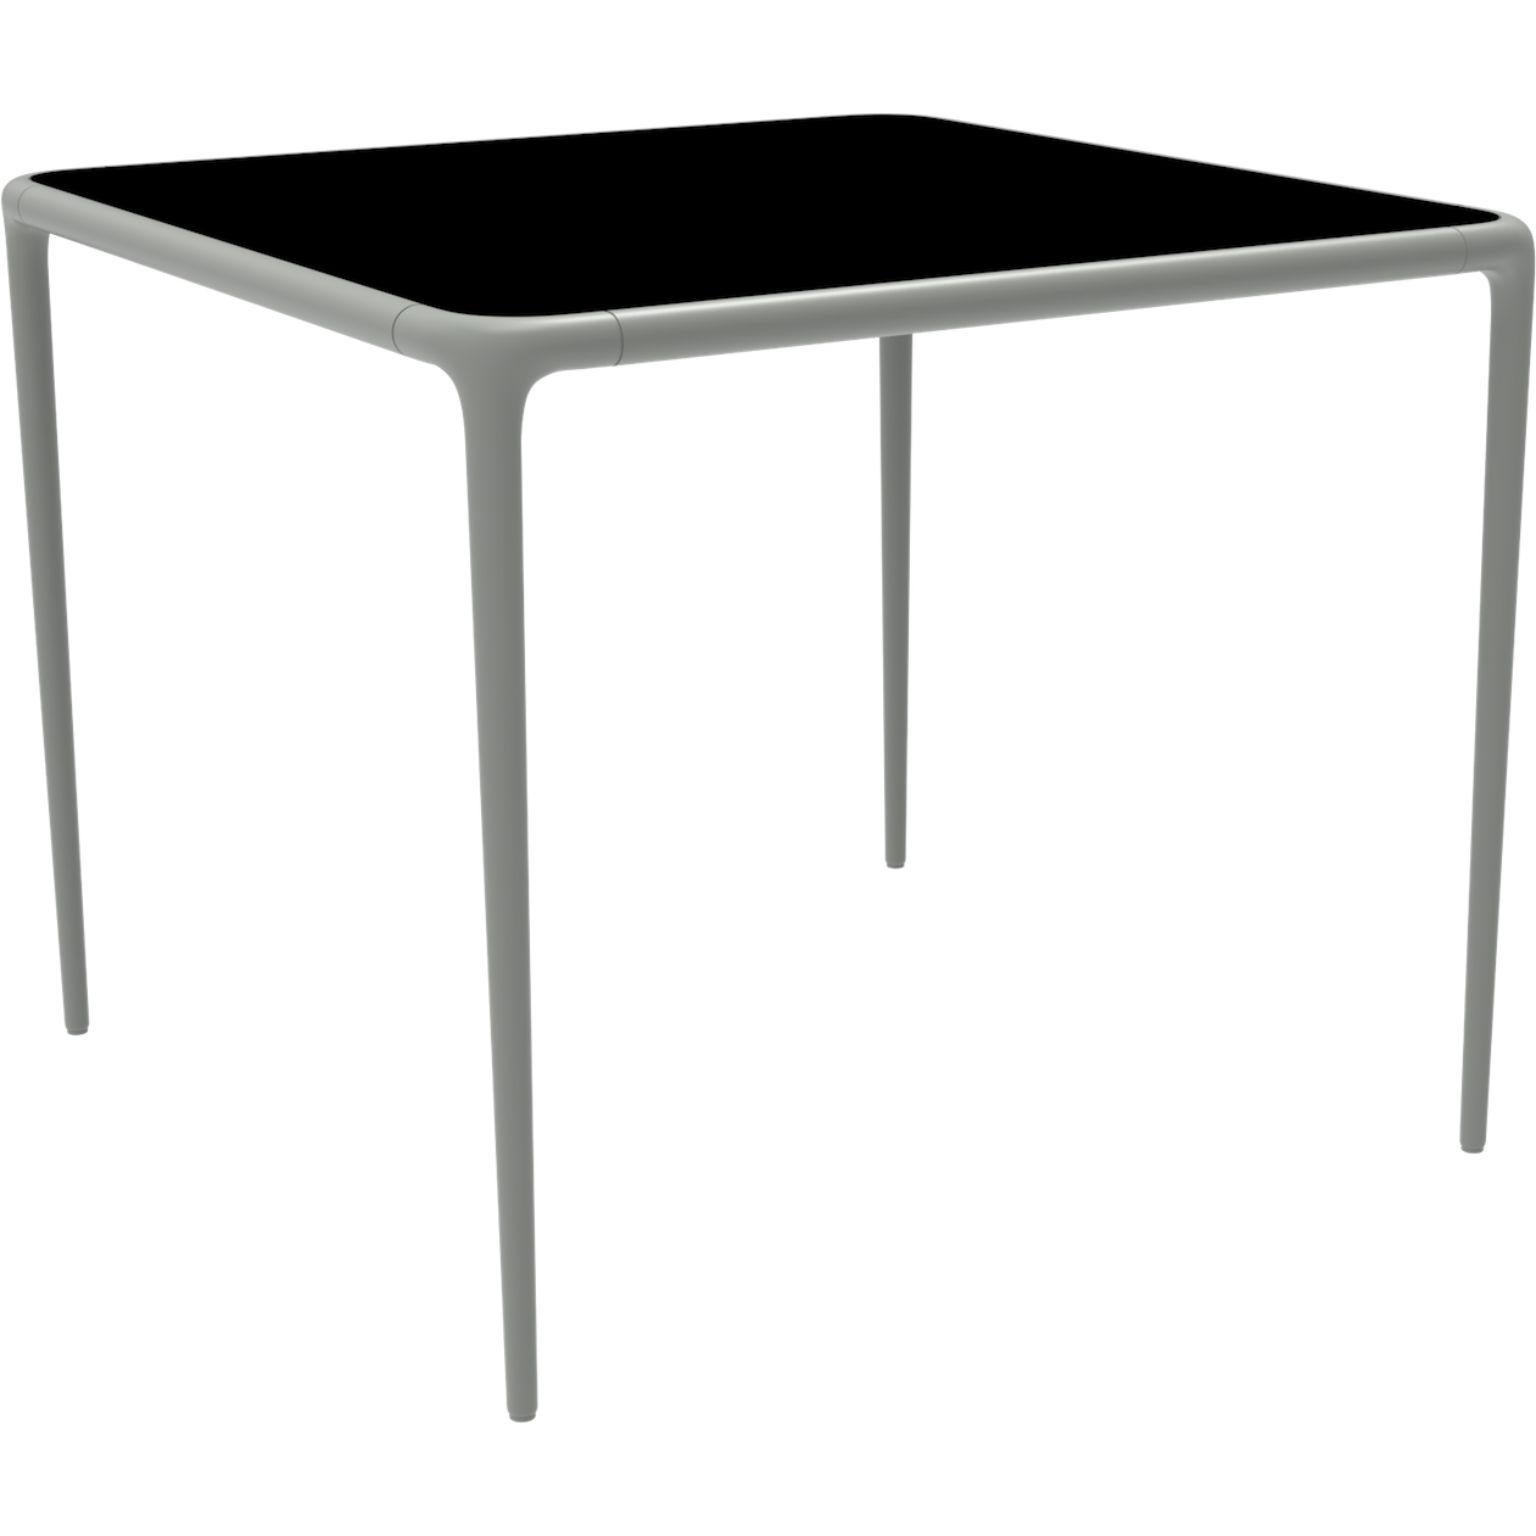 Xaloc silver glass top table 90 by Mowee.
Dimensions: D90 x W90 x H74 cm.
Material: Aluminum, tinted tempered glass top.
Also available in different aluminum colors and finishes (HPL Black Edge or Neolith). 

 Xaloc synthesizes the lines of